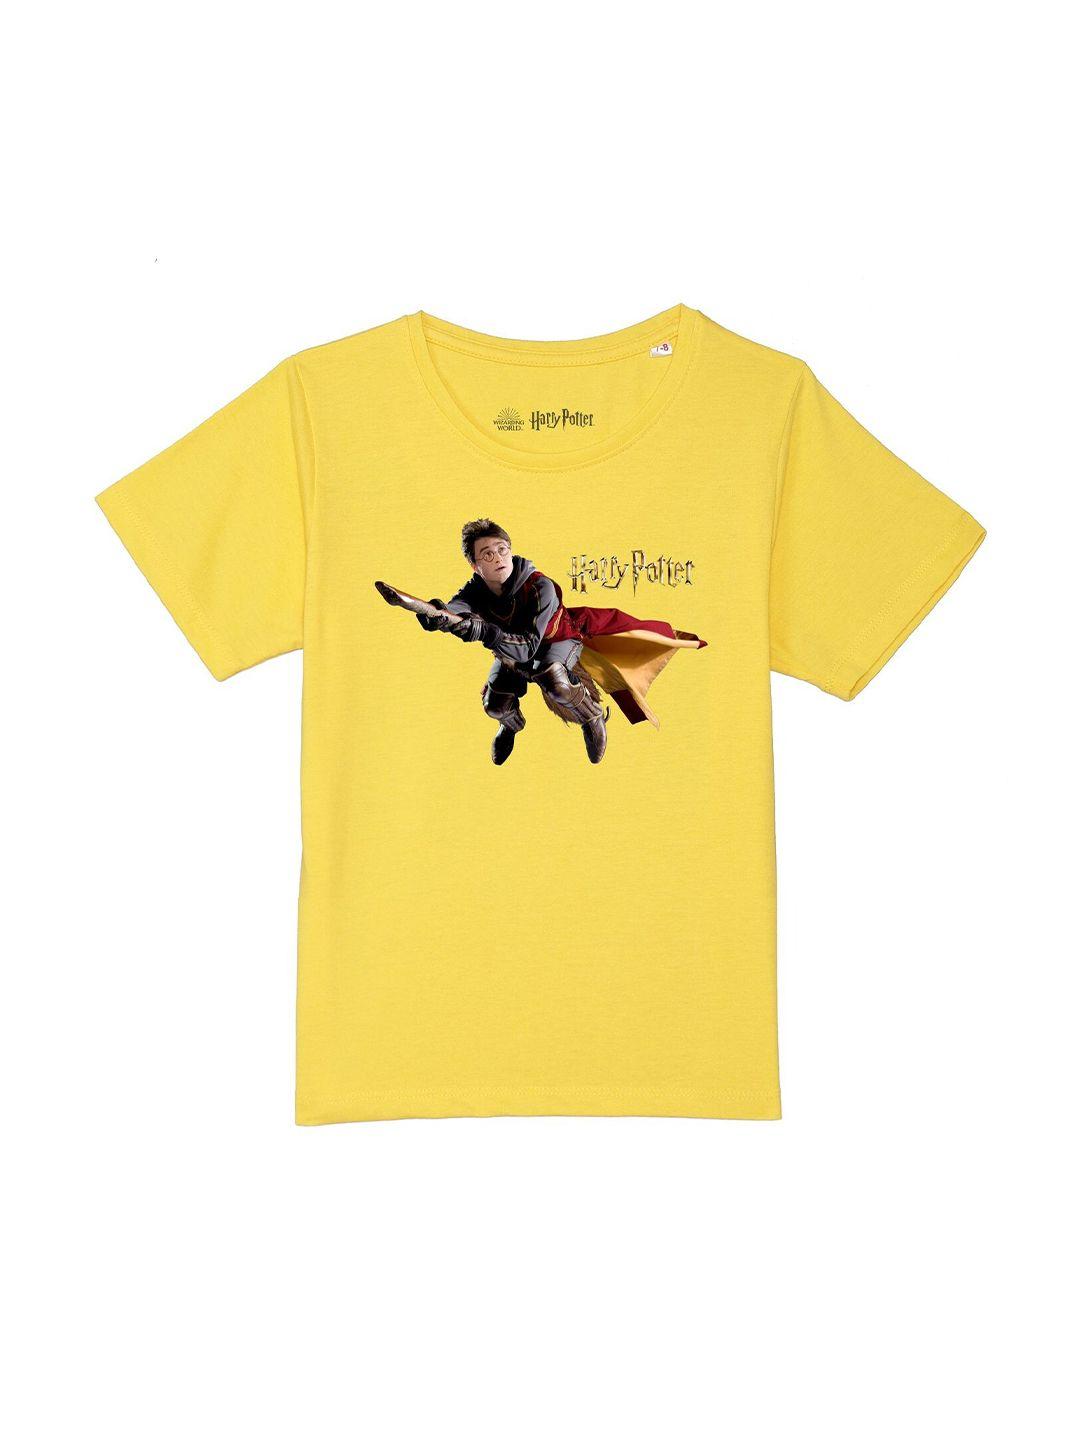 harry potter by wear your mind boys yellow & black printed pure cotton t-shirt